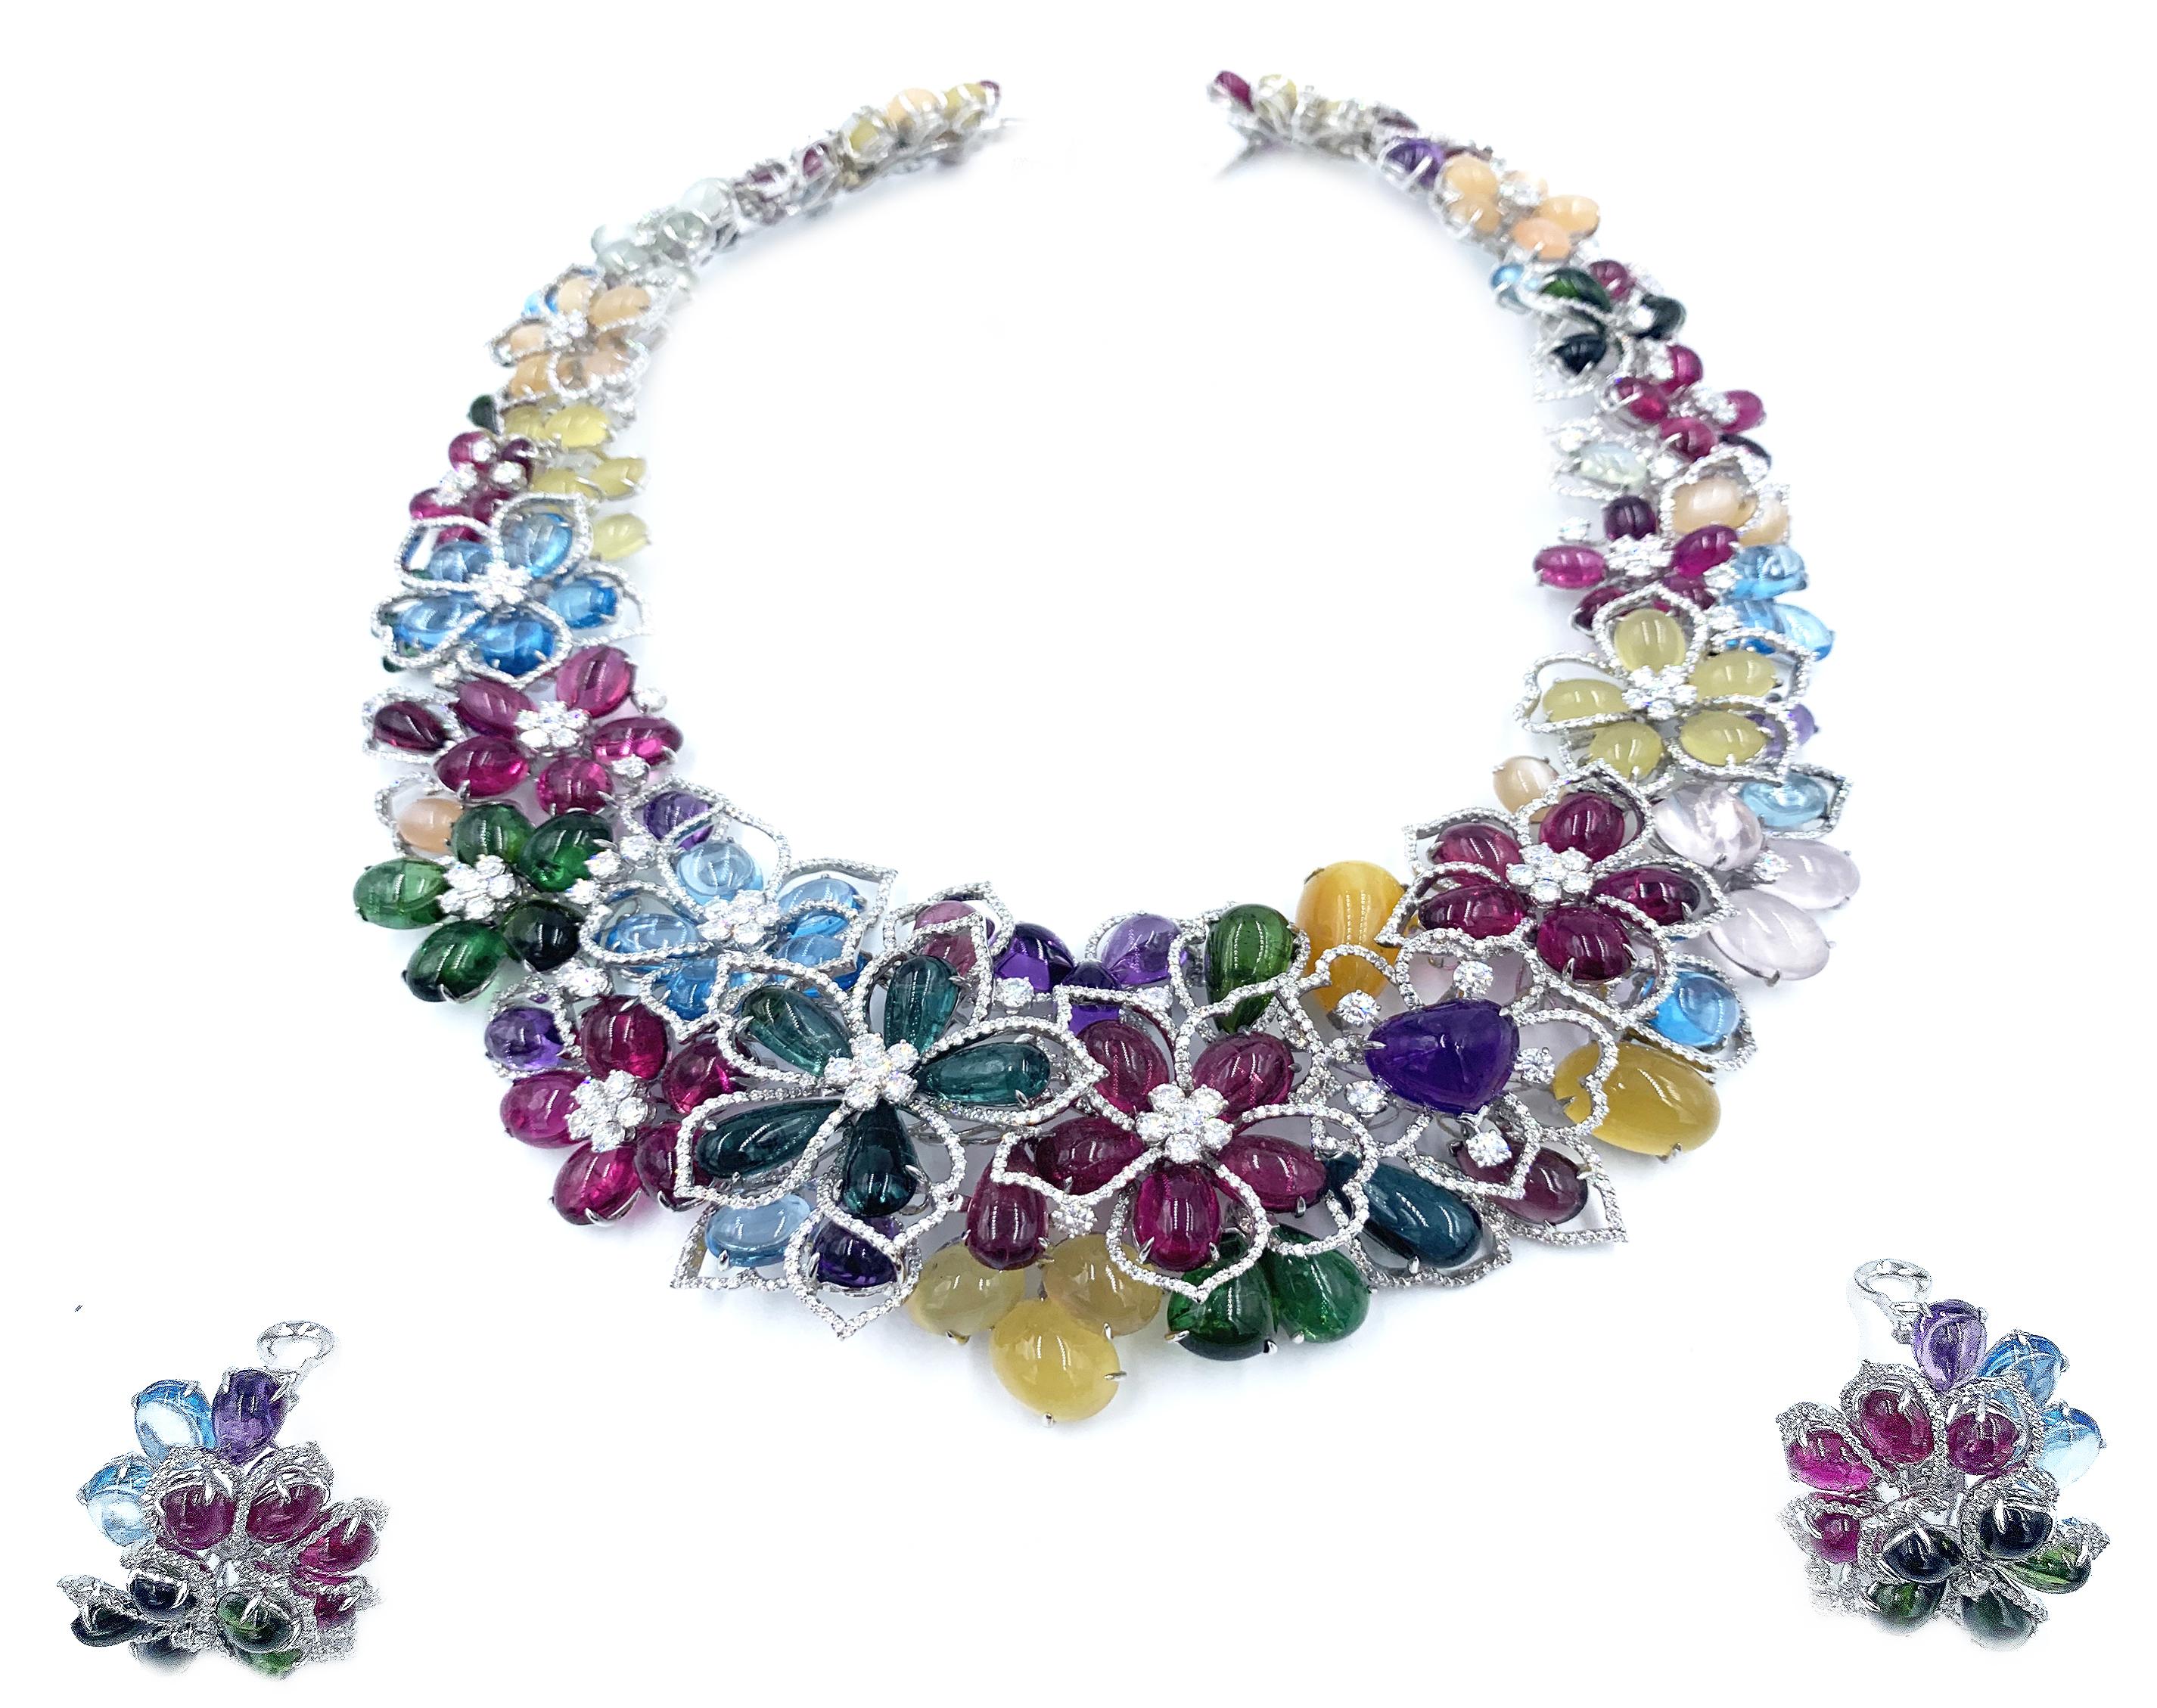 This beautifully hand crafted Multi-colored necklace, earrings, and ring suite from the renowned jeweler Gregg Ruth is from his ‘Malibu Beach Collection’. Made up of a fabulous array of colored stones, such as blue topaz, Amethyst, green and pink